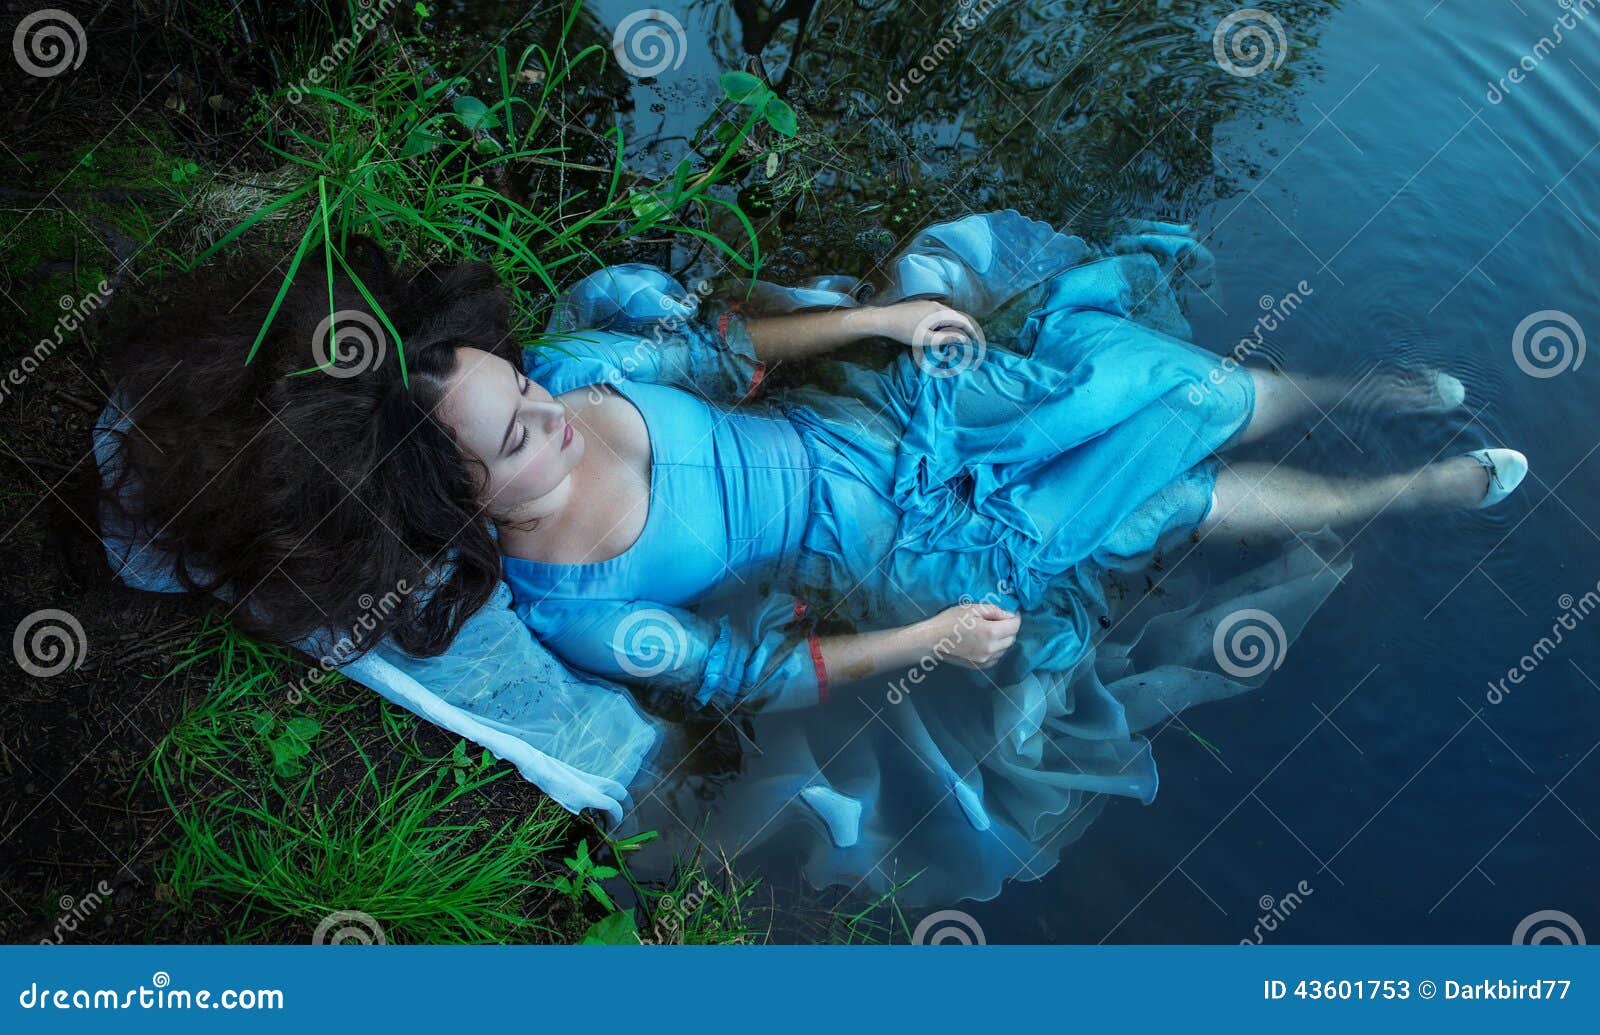 young beautiful drowned woman lying in the water